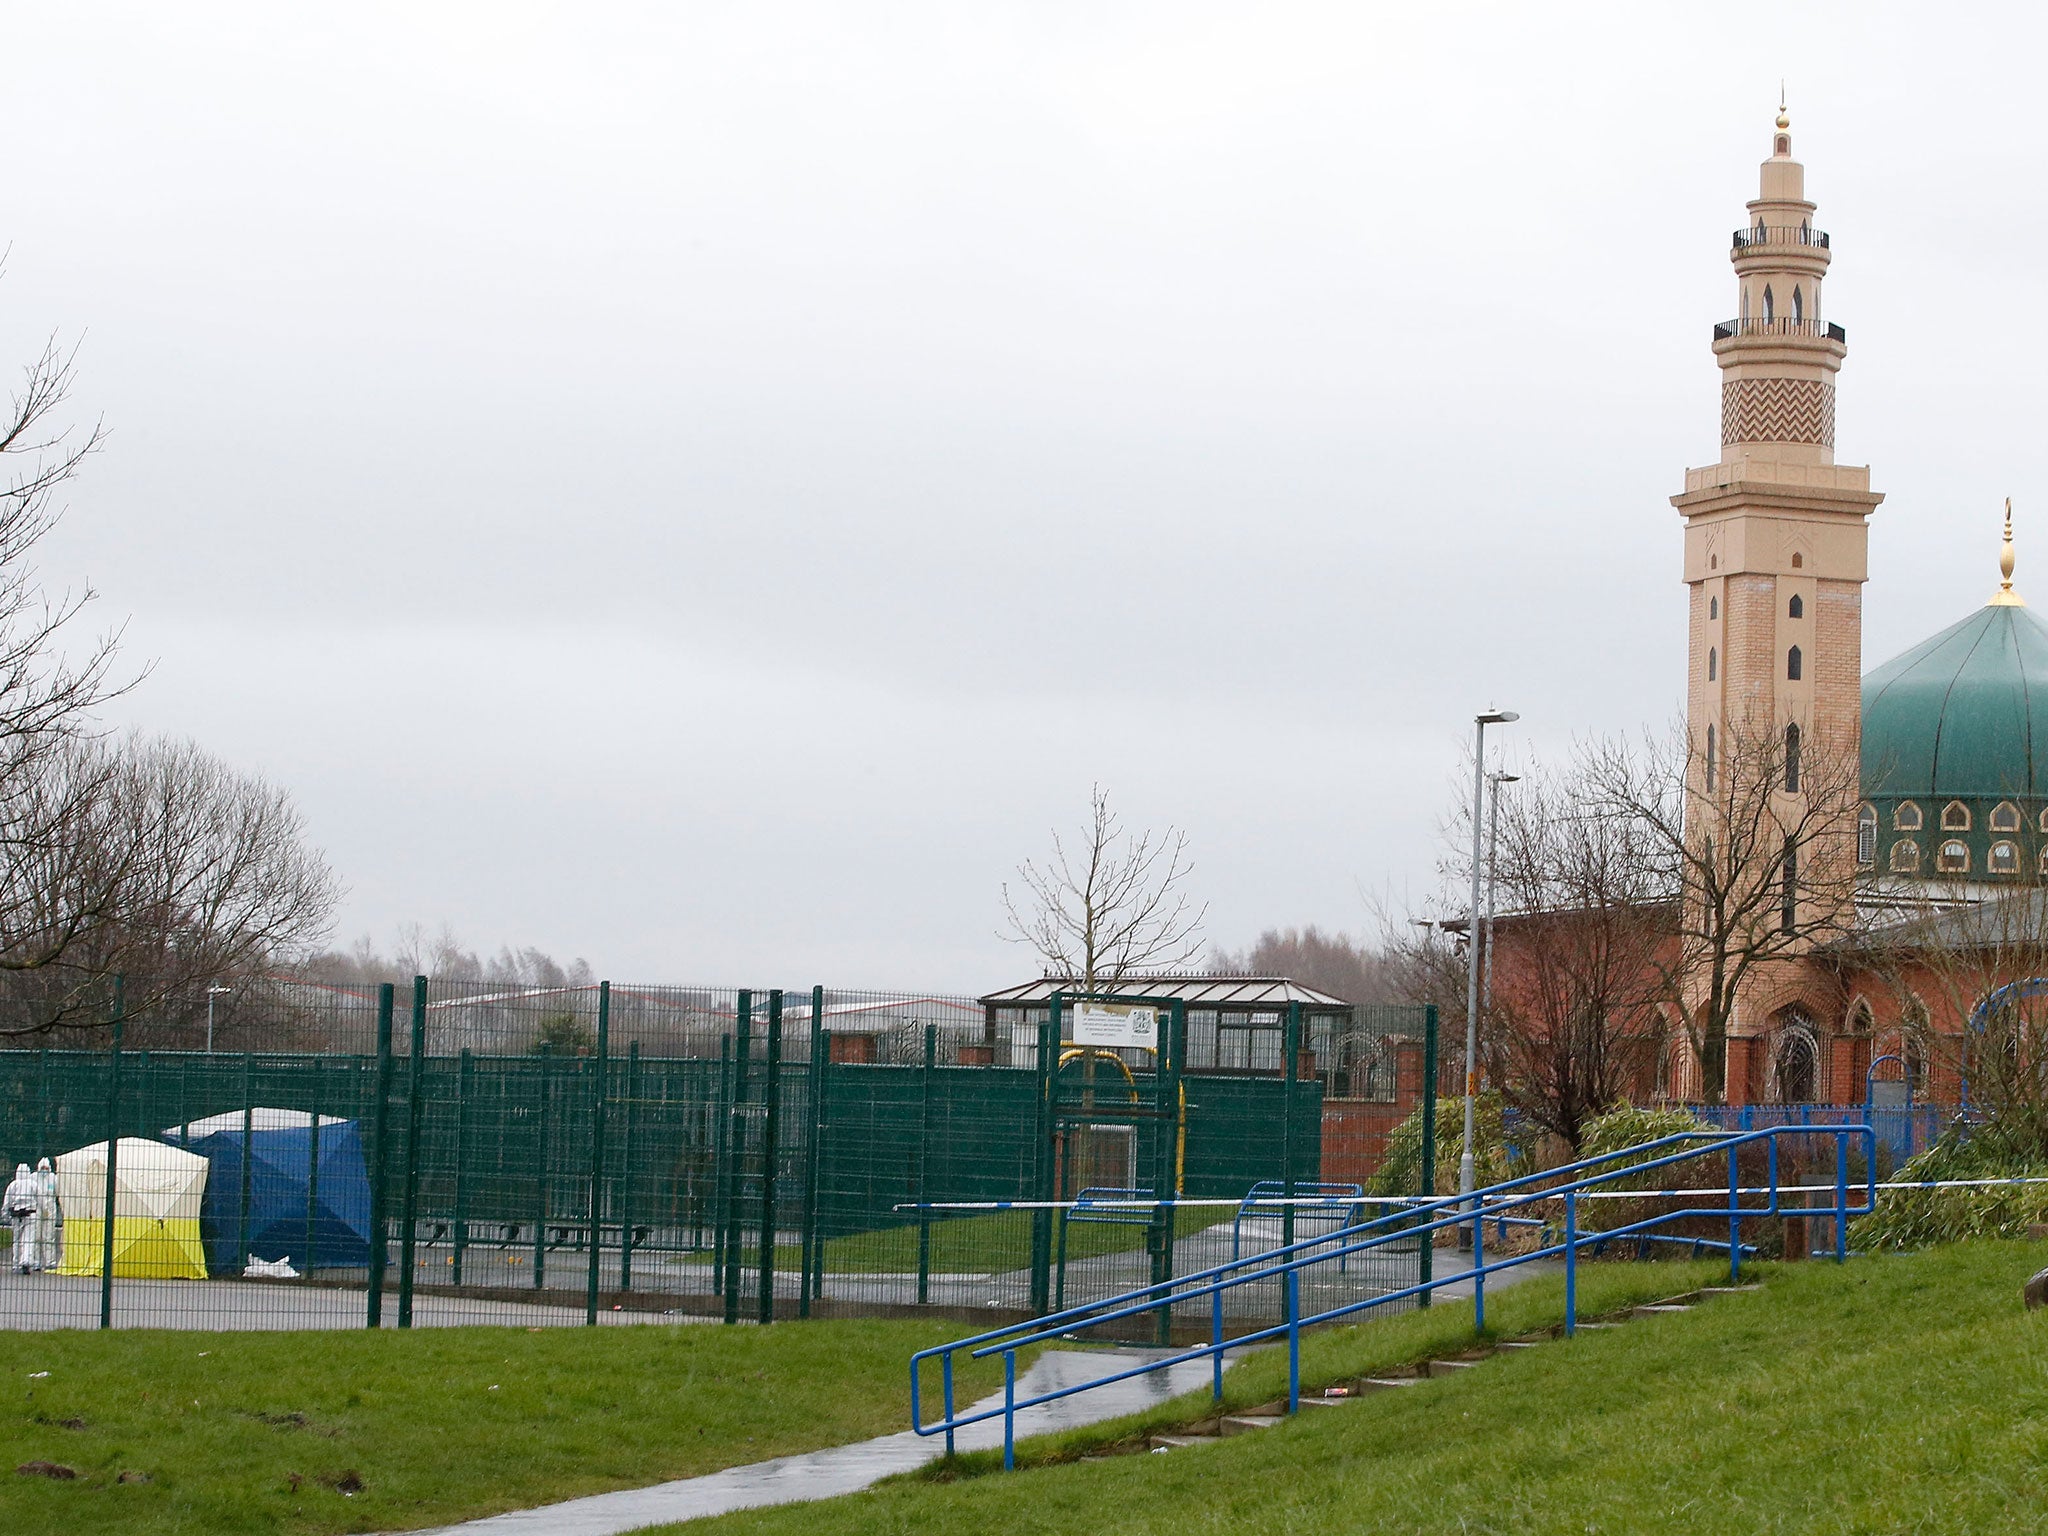 Crime scene investigators at a childrens play area (left) in Rochdale where an imam of a mosque has died after being found with serious head injuries while on his way home from evening prayers.